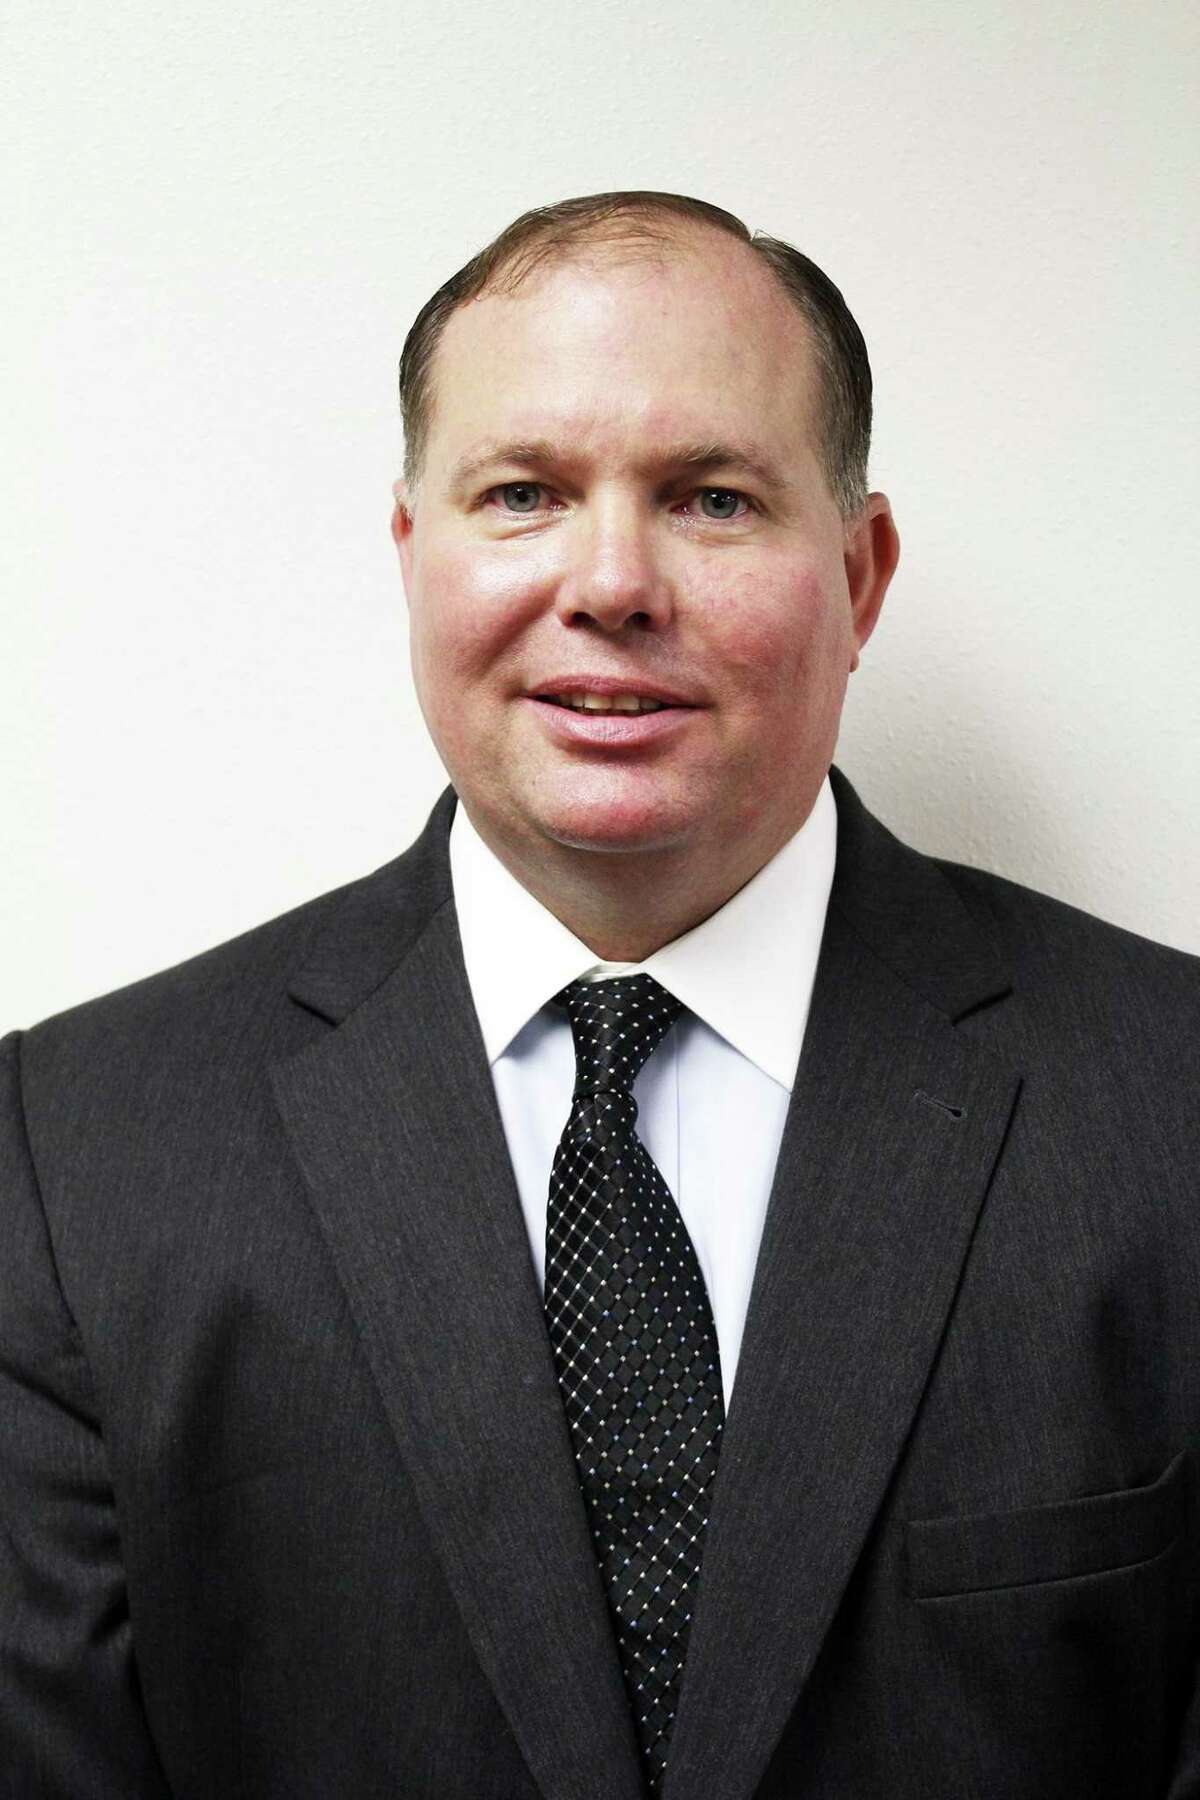 A lawyer for Stetson Roane, the Seguin ISD superintendent of schools, said the terms of his departure were being finalized. The school board voted late Monday to accept a deal but has not made its terms public. He was placed on paid leave after a complaint, which also has not been made public.